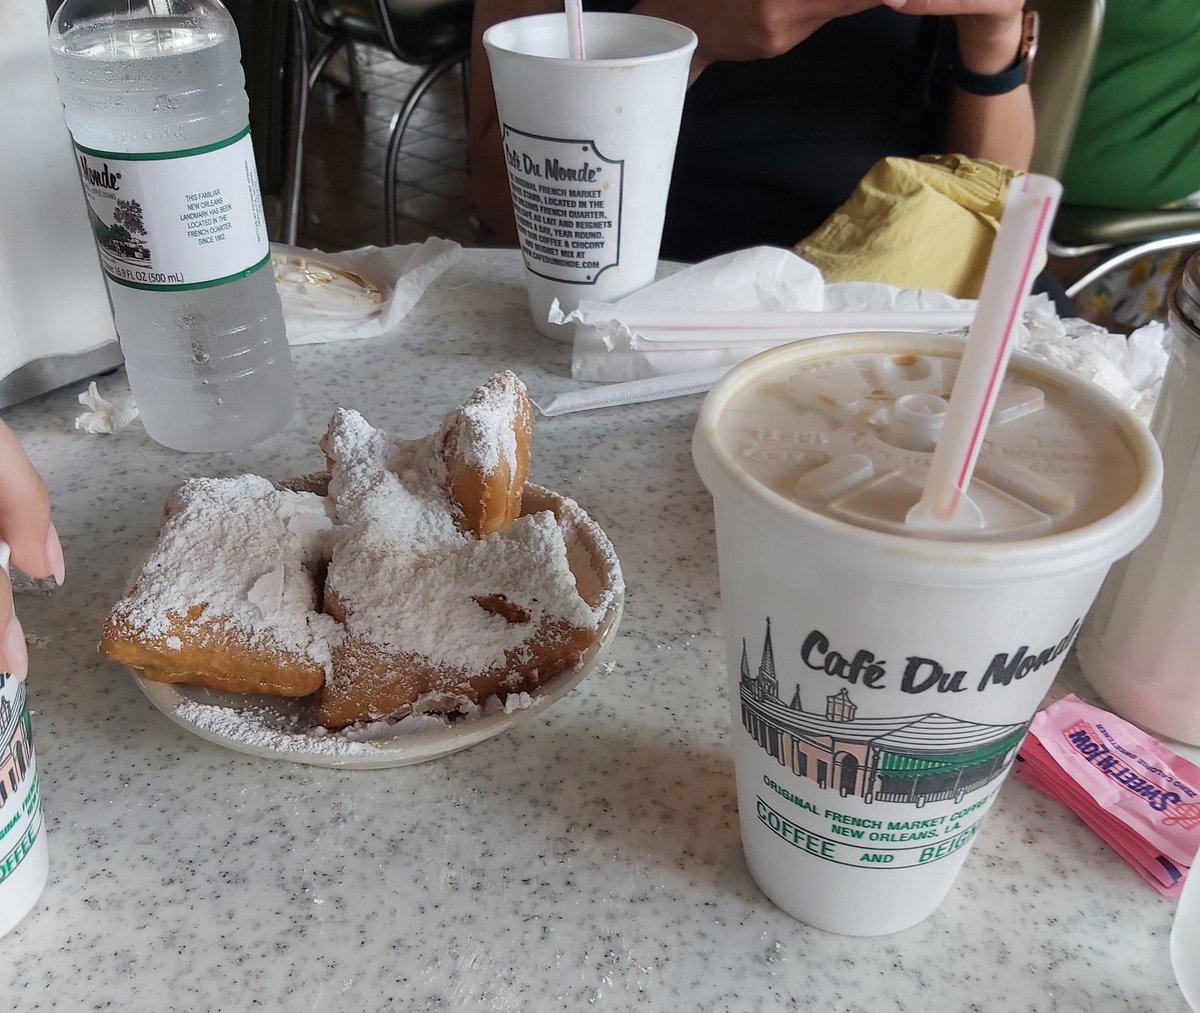 Last day in New Orleans, beignets for breakfast 😊